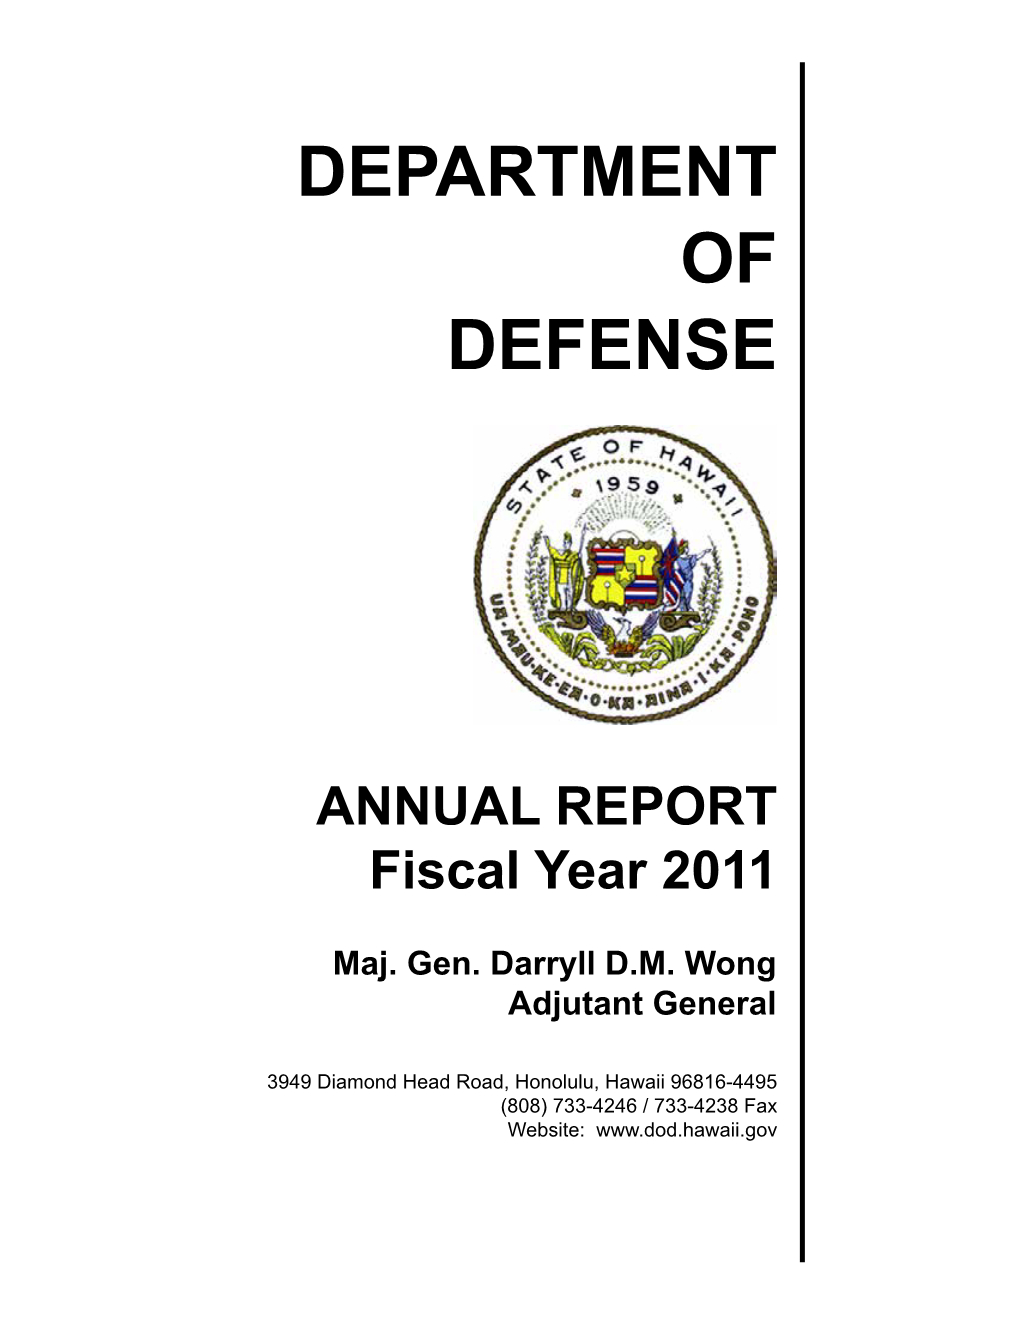 ANNUAL REPORT Fiscal Year 2011